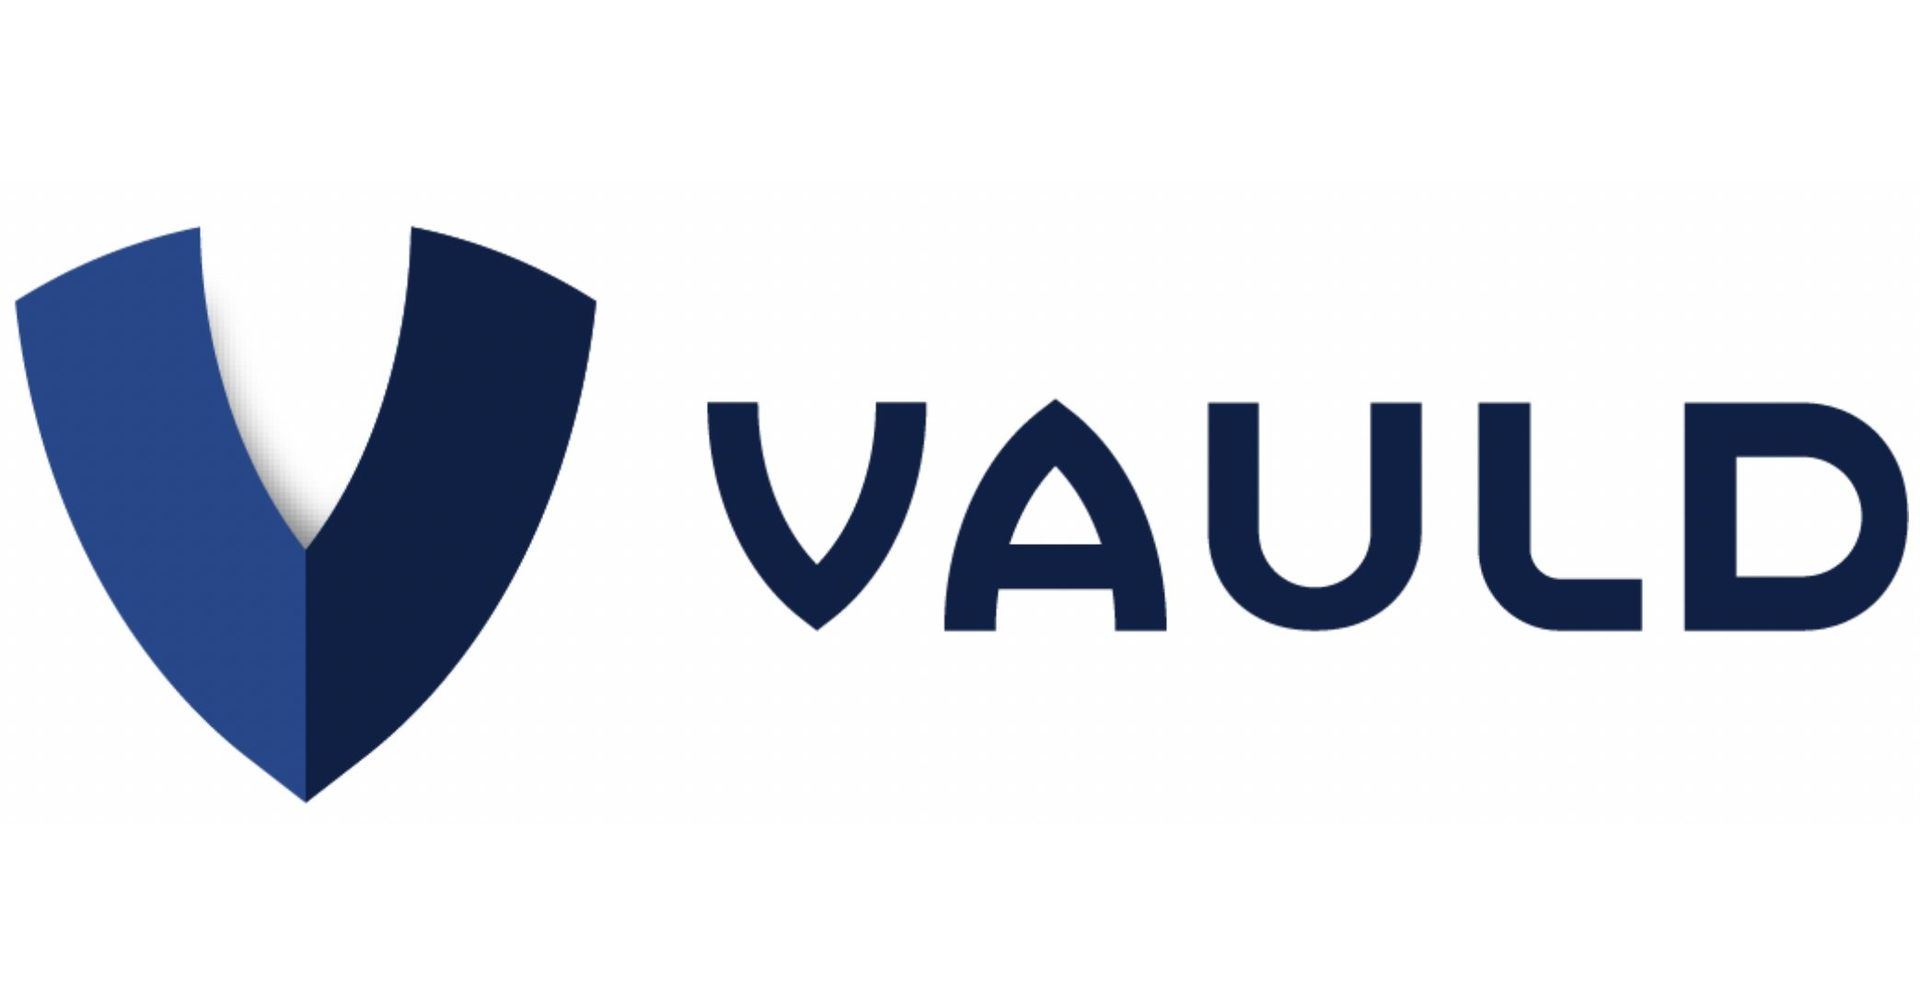 In this article, we are going to be going over Vauld cryptocurrency financial challenges, as the decrease in bitcoin prices affects the whole crypto market.